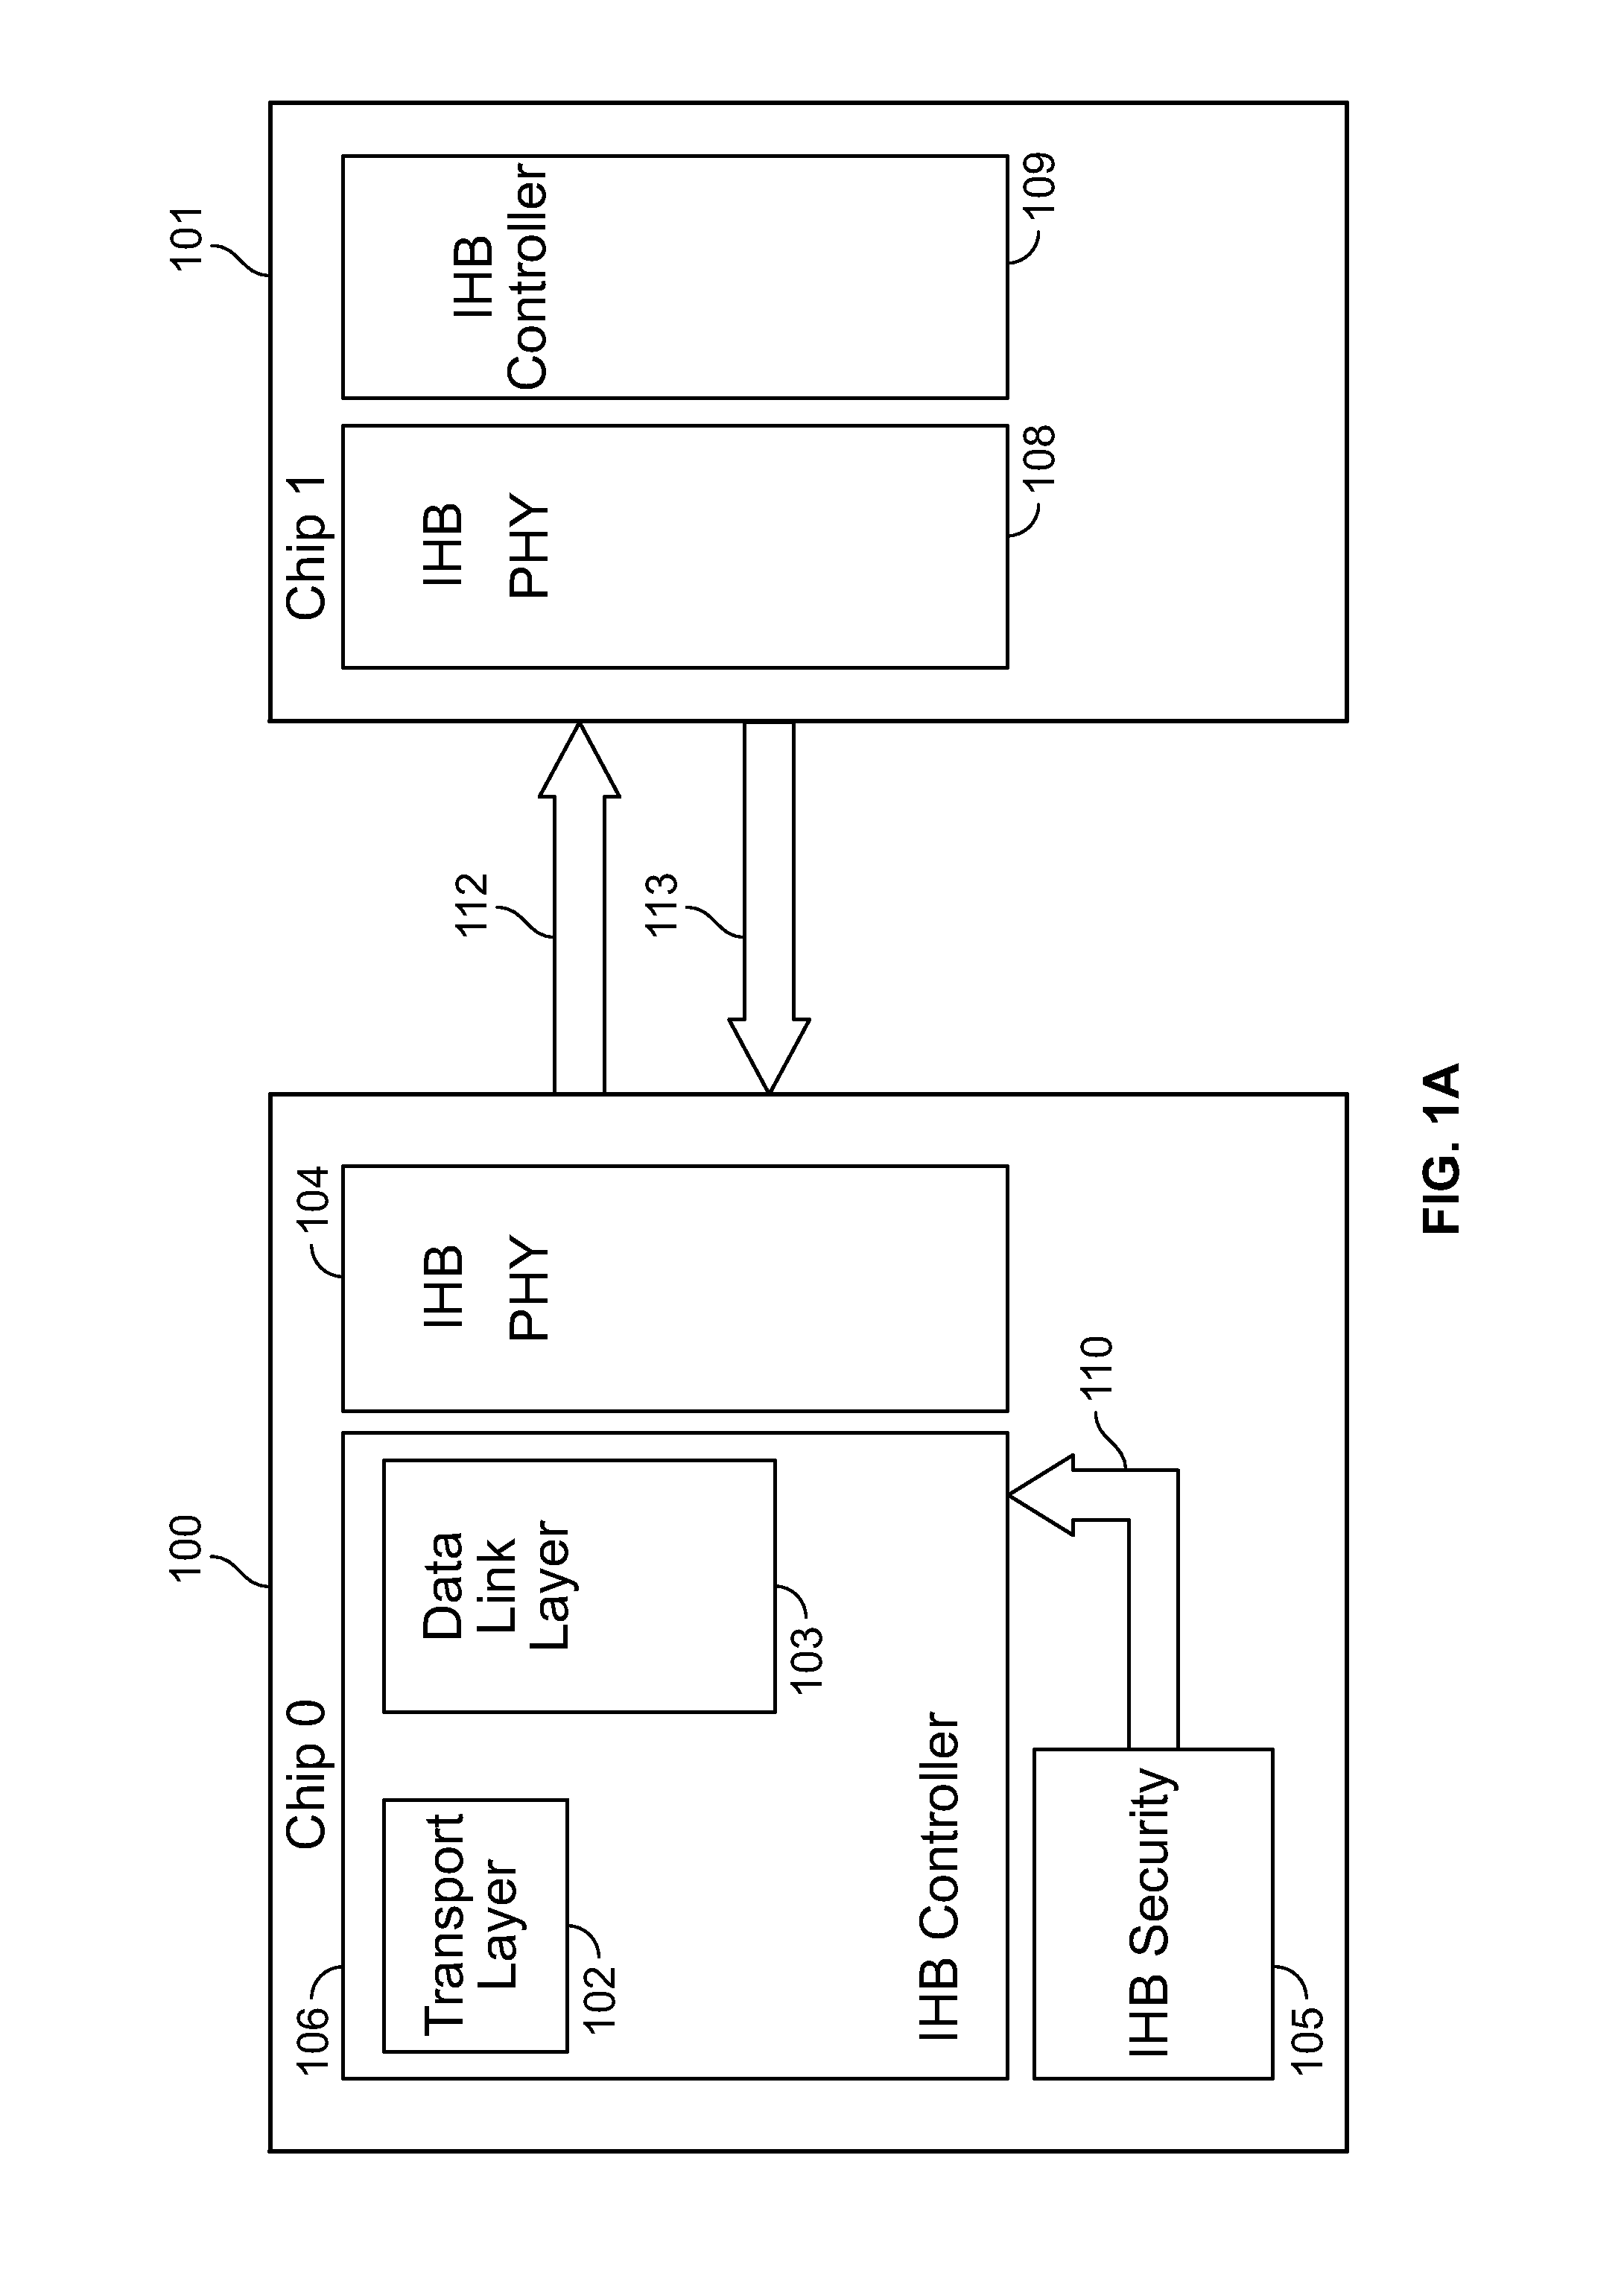 Systems and methods for secured data transfer via inter-chip hopping buses